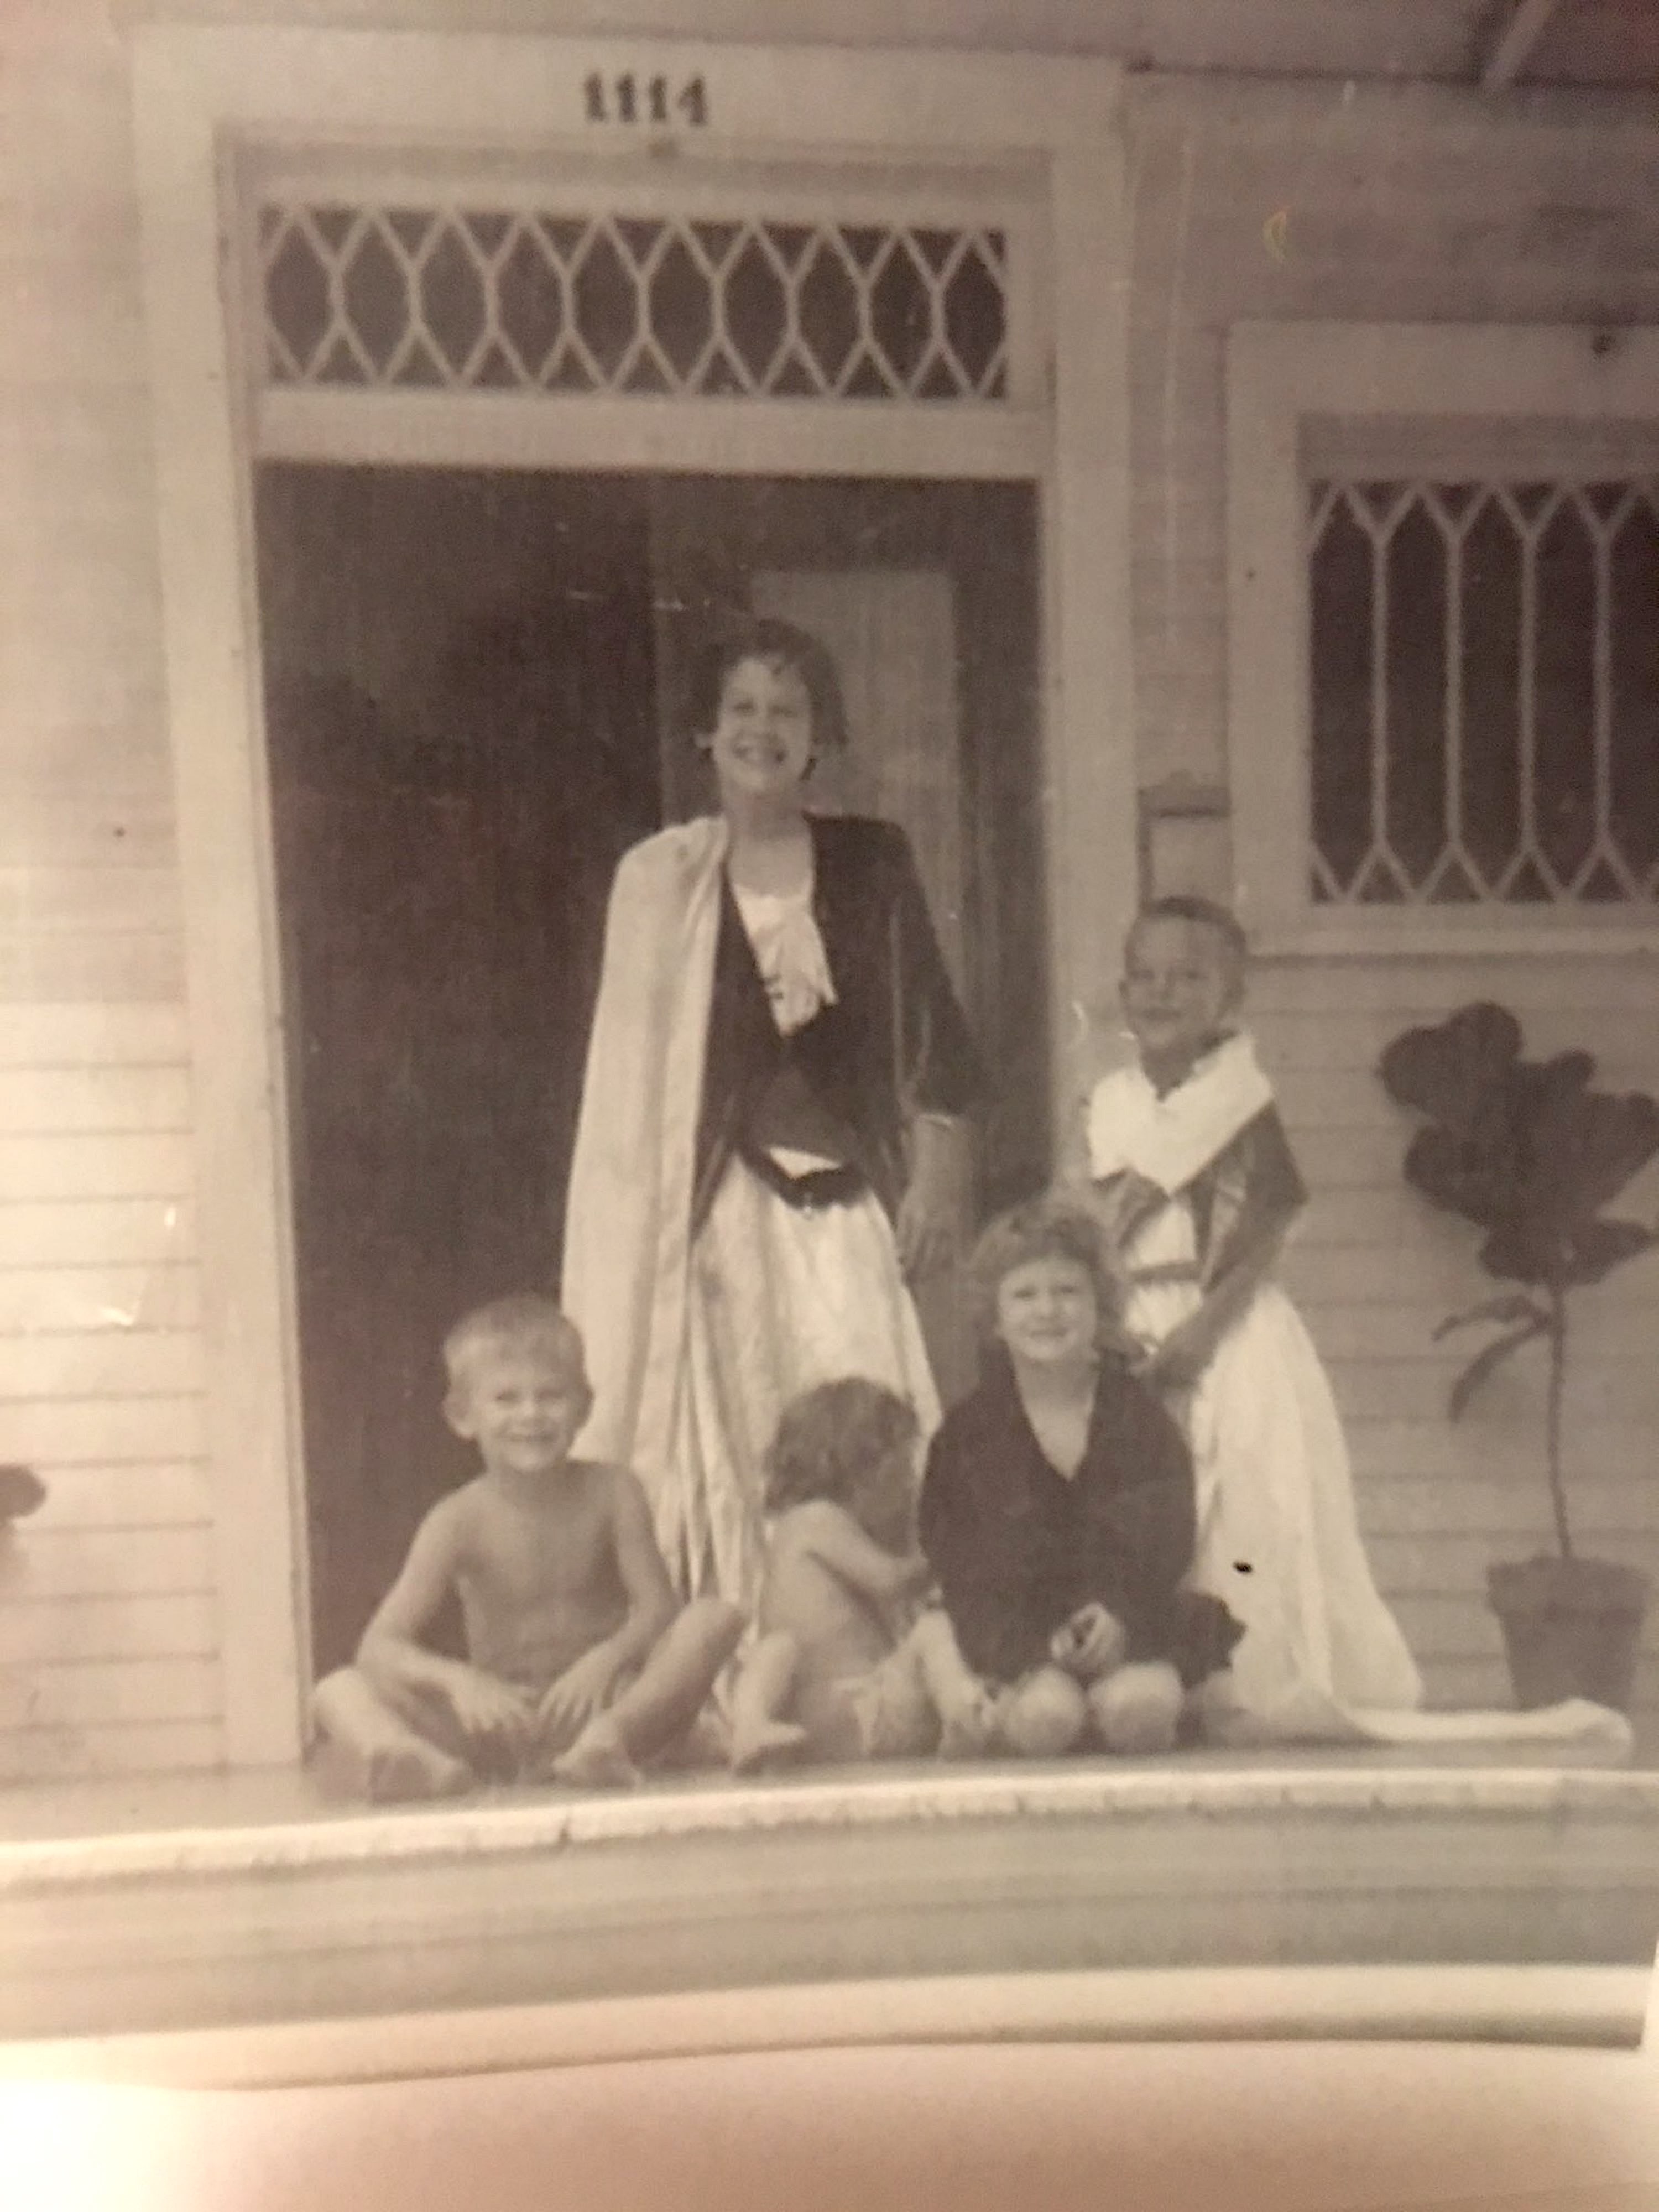 Rags (placed on the far right) with the Barretts in New Orleans, LA, circa 1954.